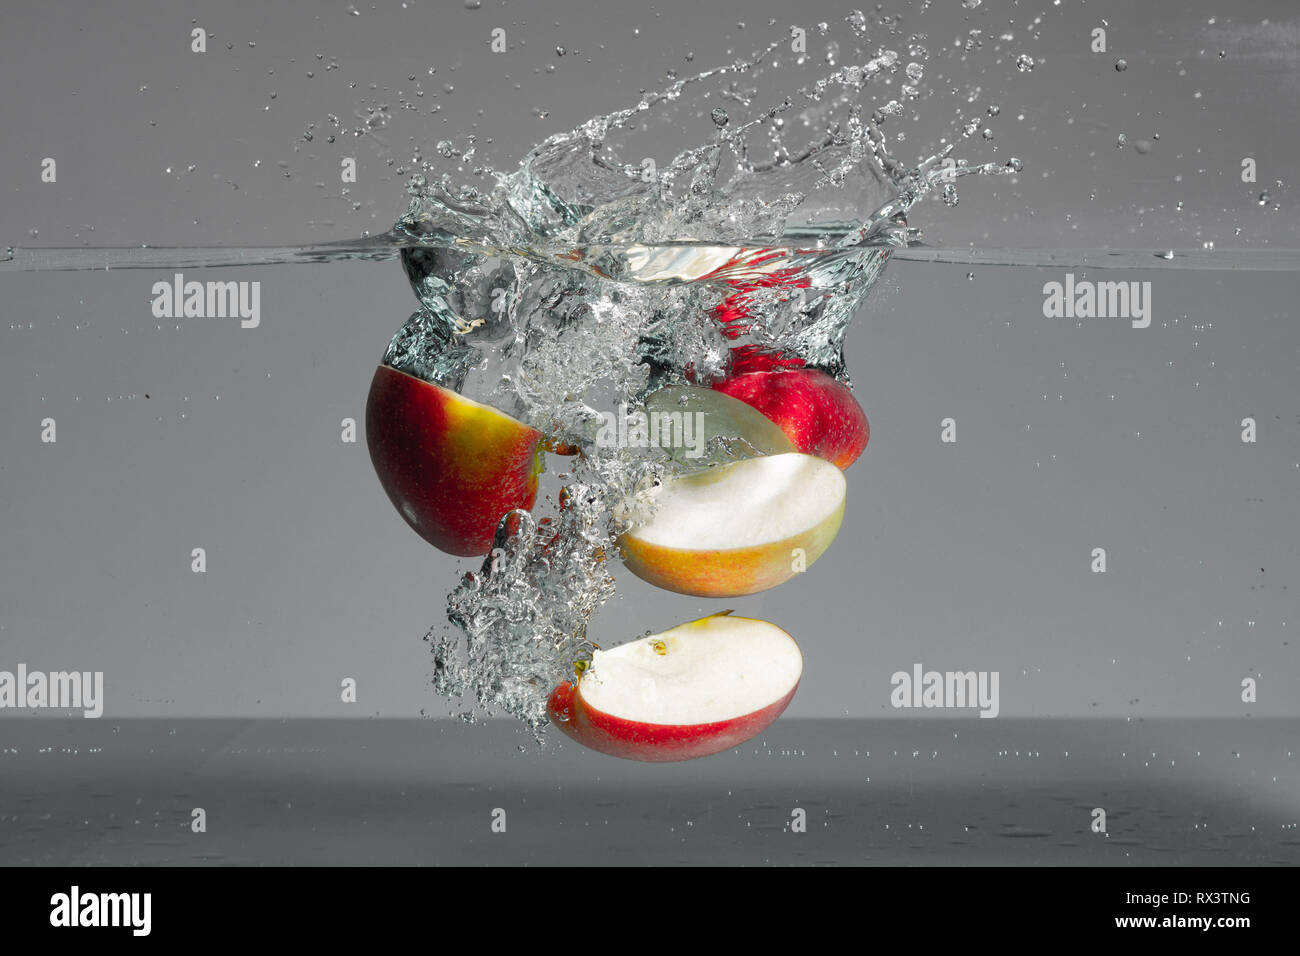 Red Apple Slices Fall Into Water And Create Beautiful Air Bubbles And Water Splashes Stock Photo Alamy